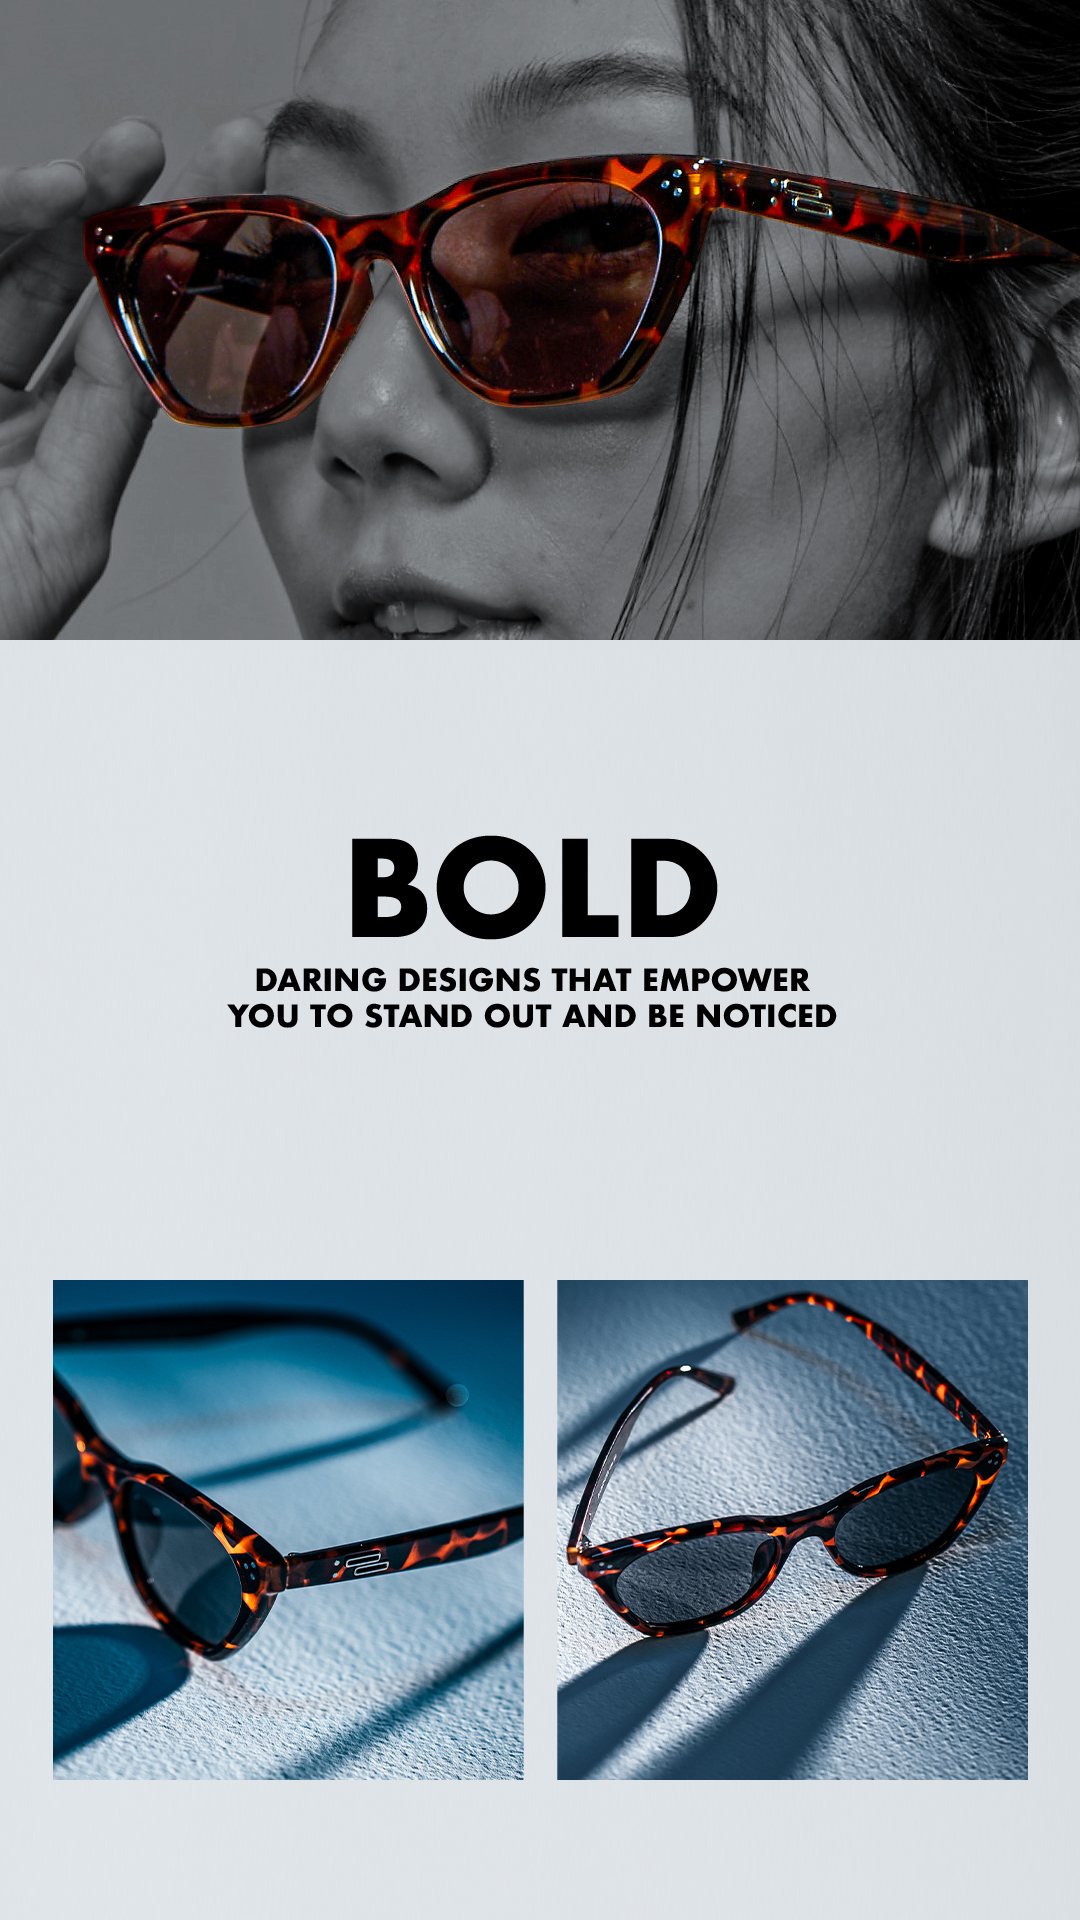 Bold - Daring designs that empower you to stand out and be noticed